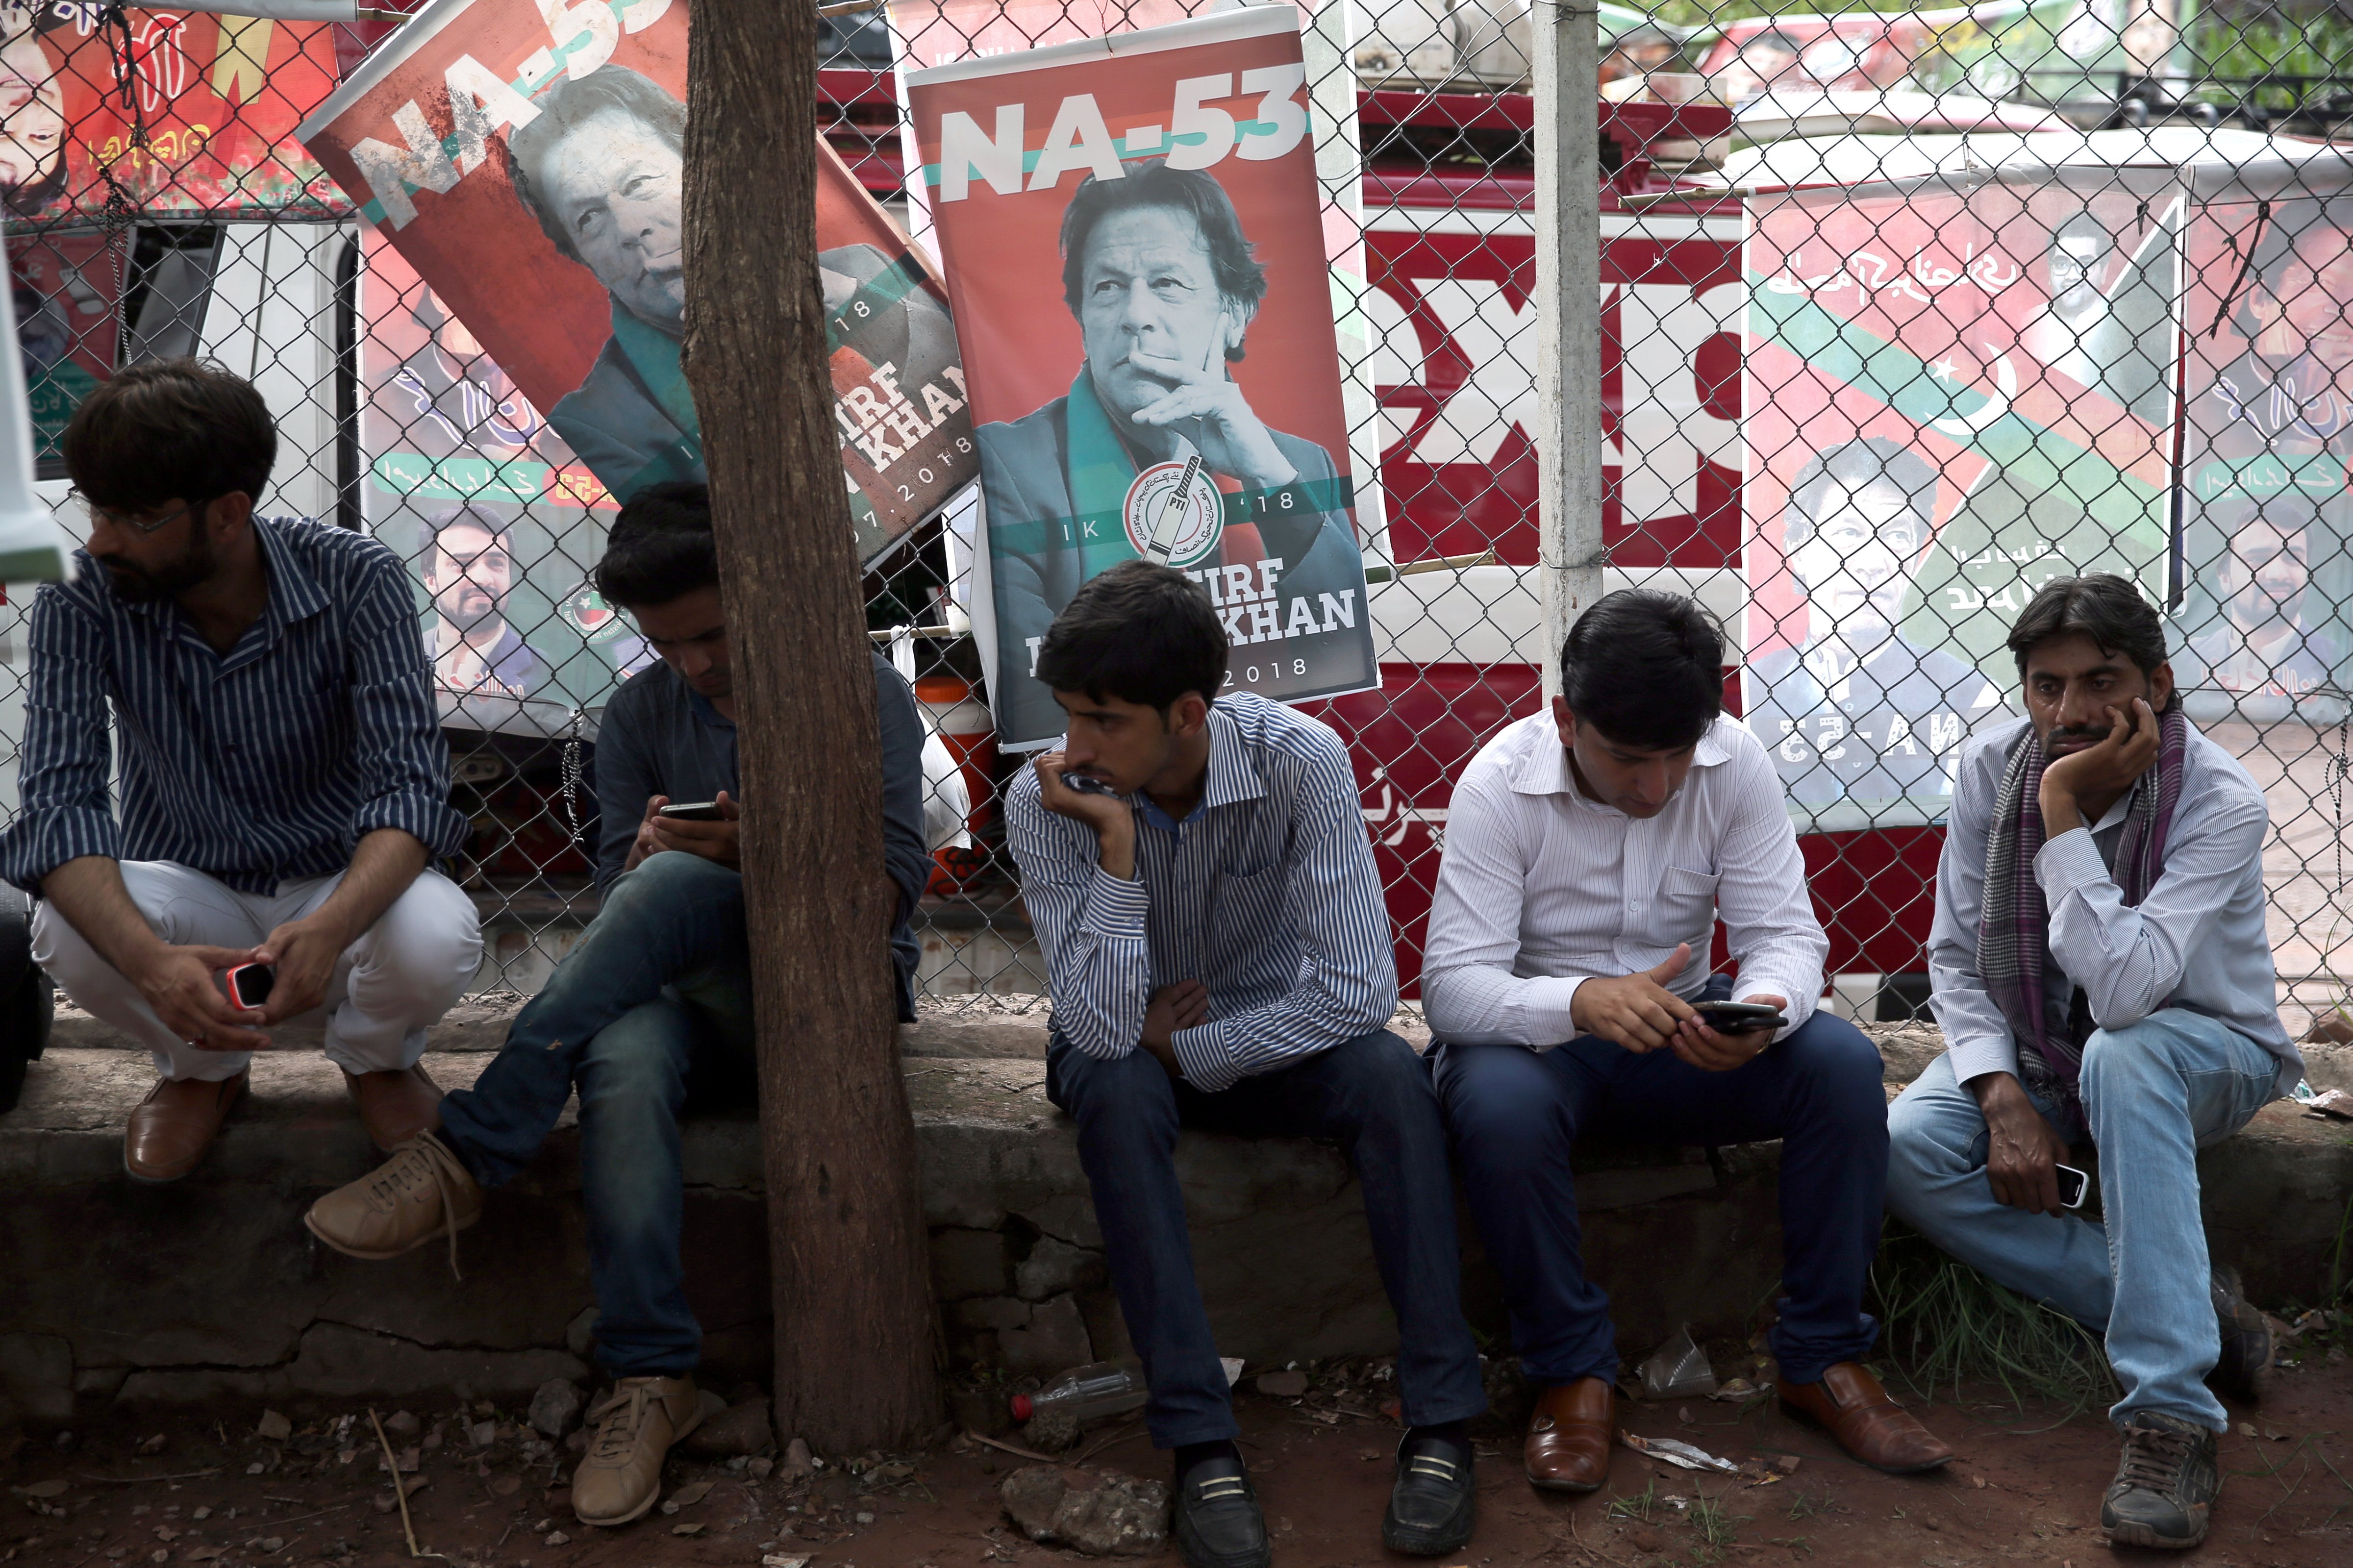 Supporters of cricket star-turned-politician Imran Khan, chairman of Pakistan Tehreek-e-Insaf (PTI), wait outside his residence, a day after the general election in Islamabad, Pakistan, July 26, 2018. (Athit Perawongmetha—Reuters)